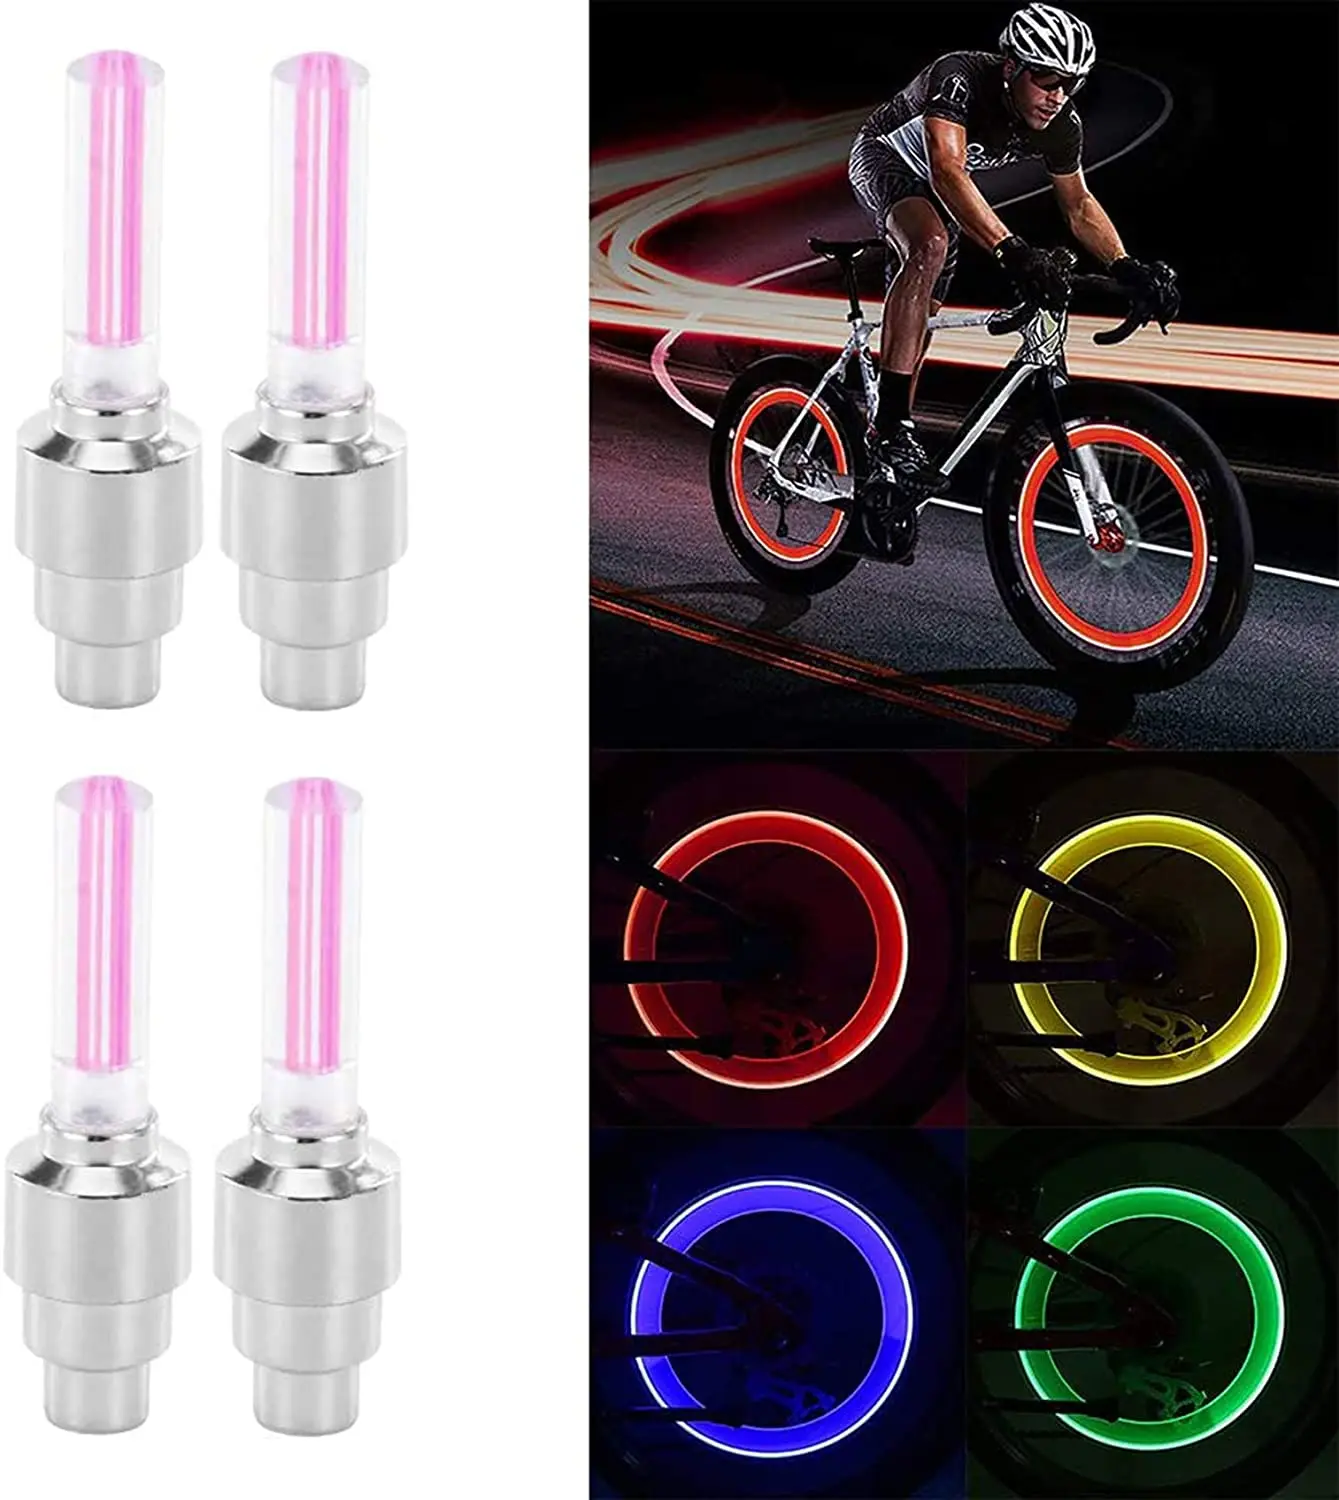 2pcs Led Flash Tyre Wheel Valve Cap Light for Car Bike Bicycle Motorcycle Wheel Light Tire (Red, Blue, Green, Mixed)